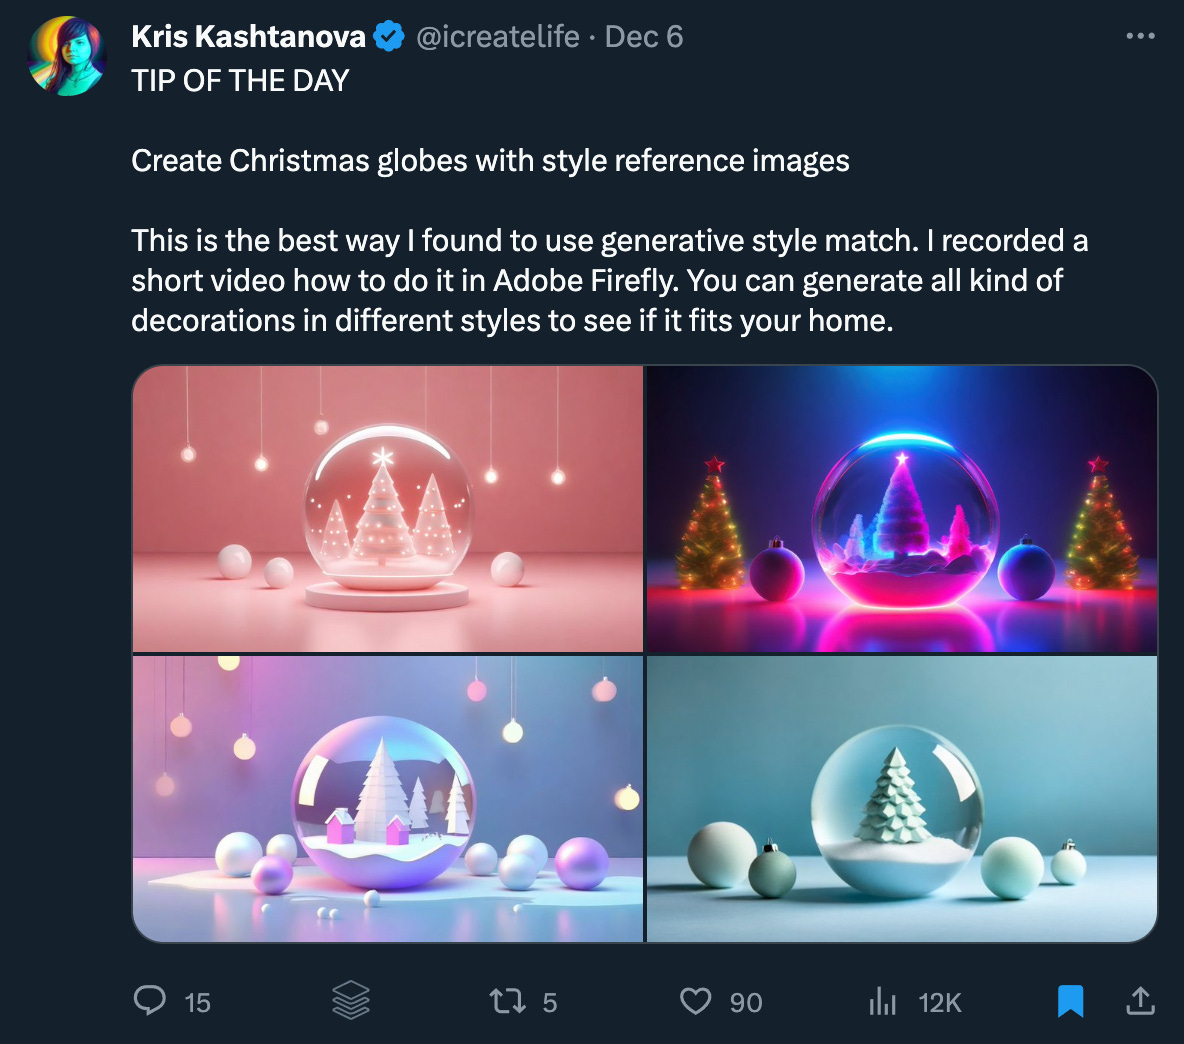 Tweet from @icreativelife showing how to create Christmas illustrations using Adobe Firefly. Four examples are demonstrated.